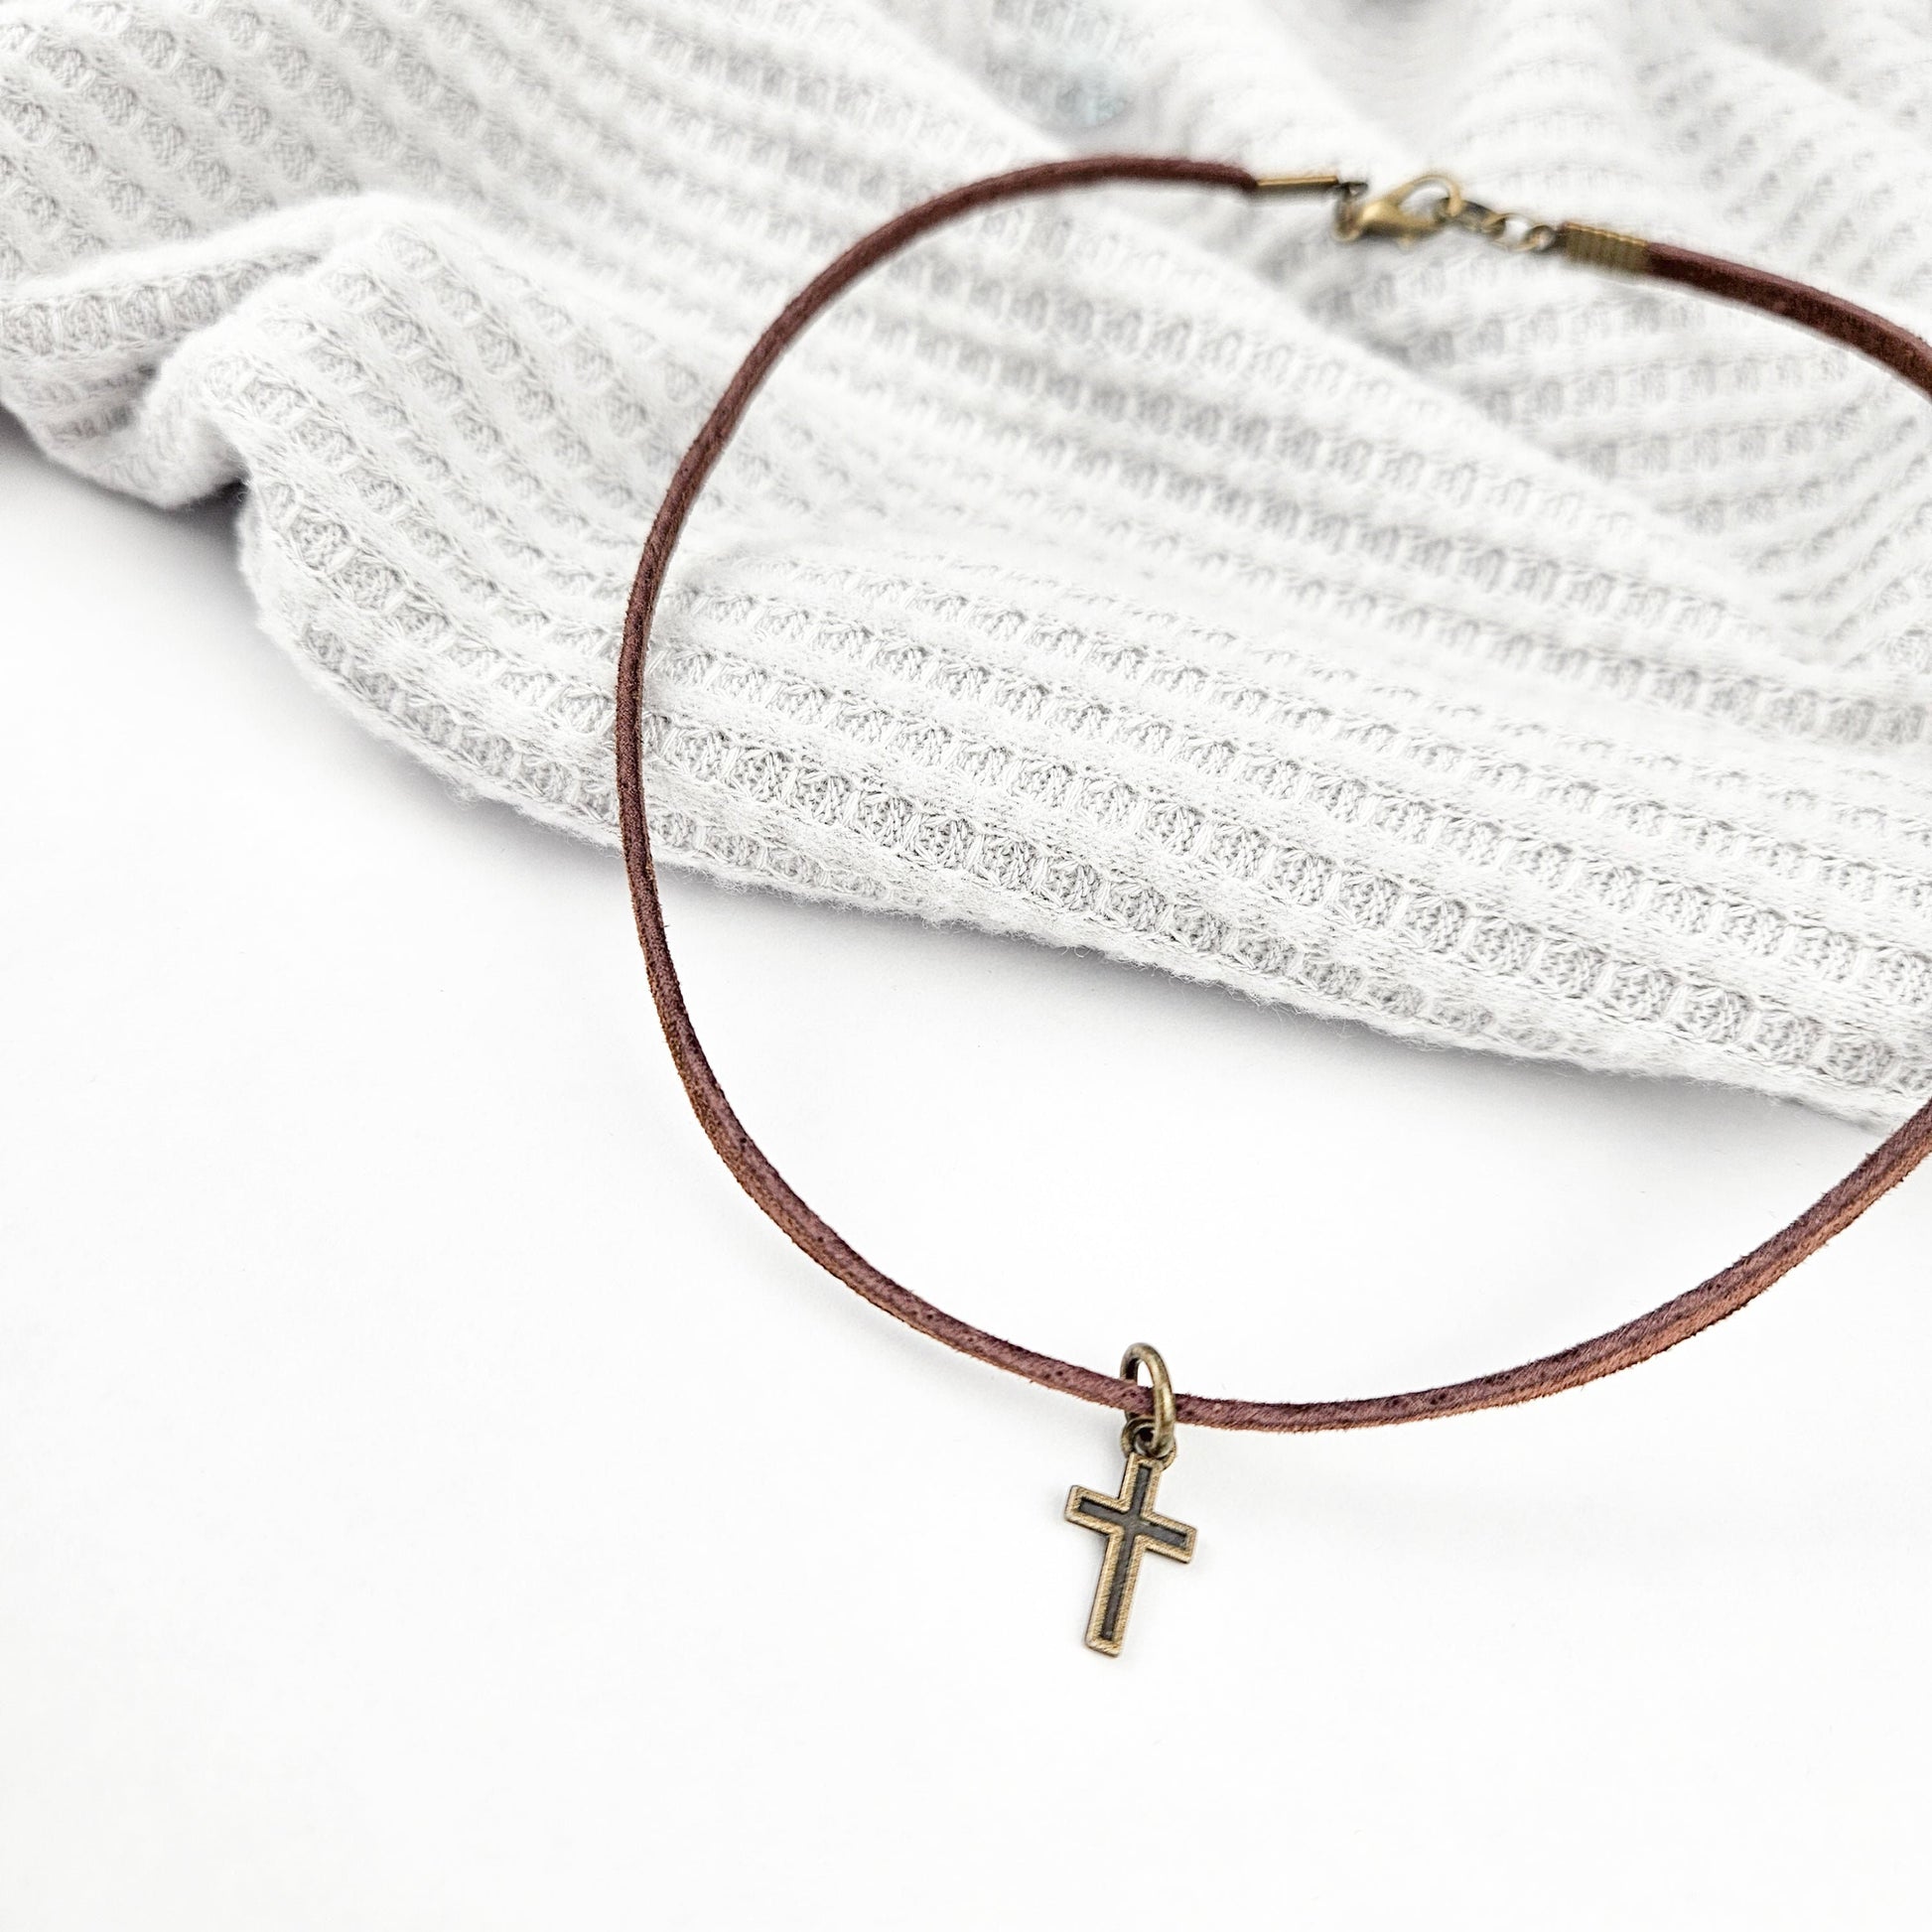 Child&#39;s Cross + Leather Essential Oil Diffuser Necklace